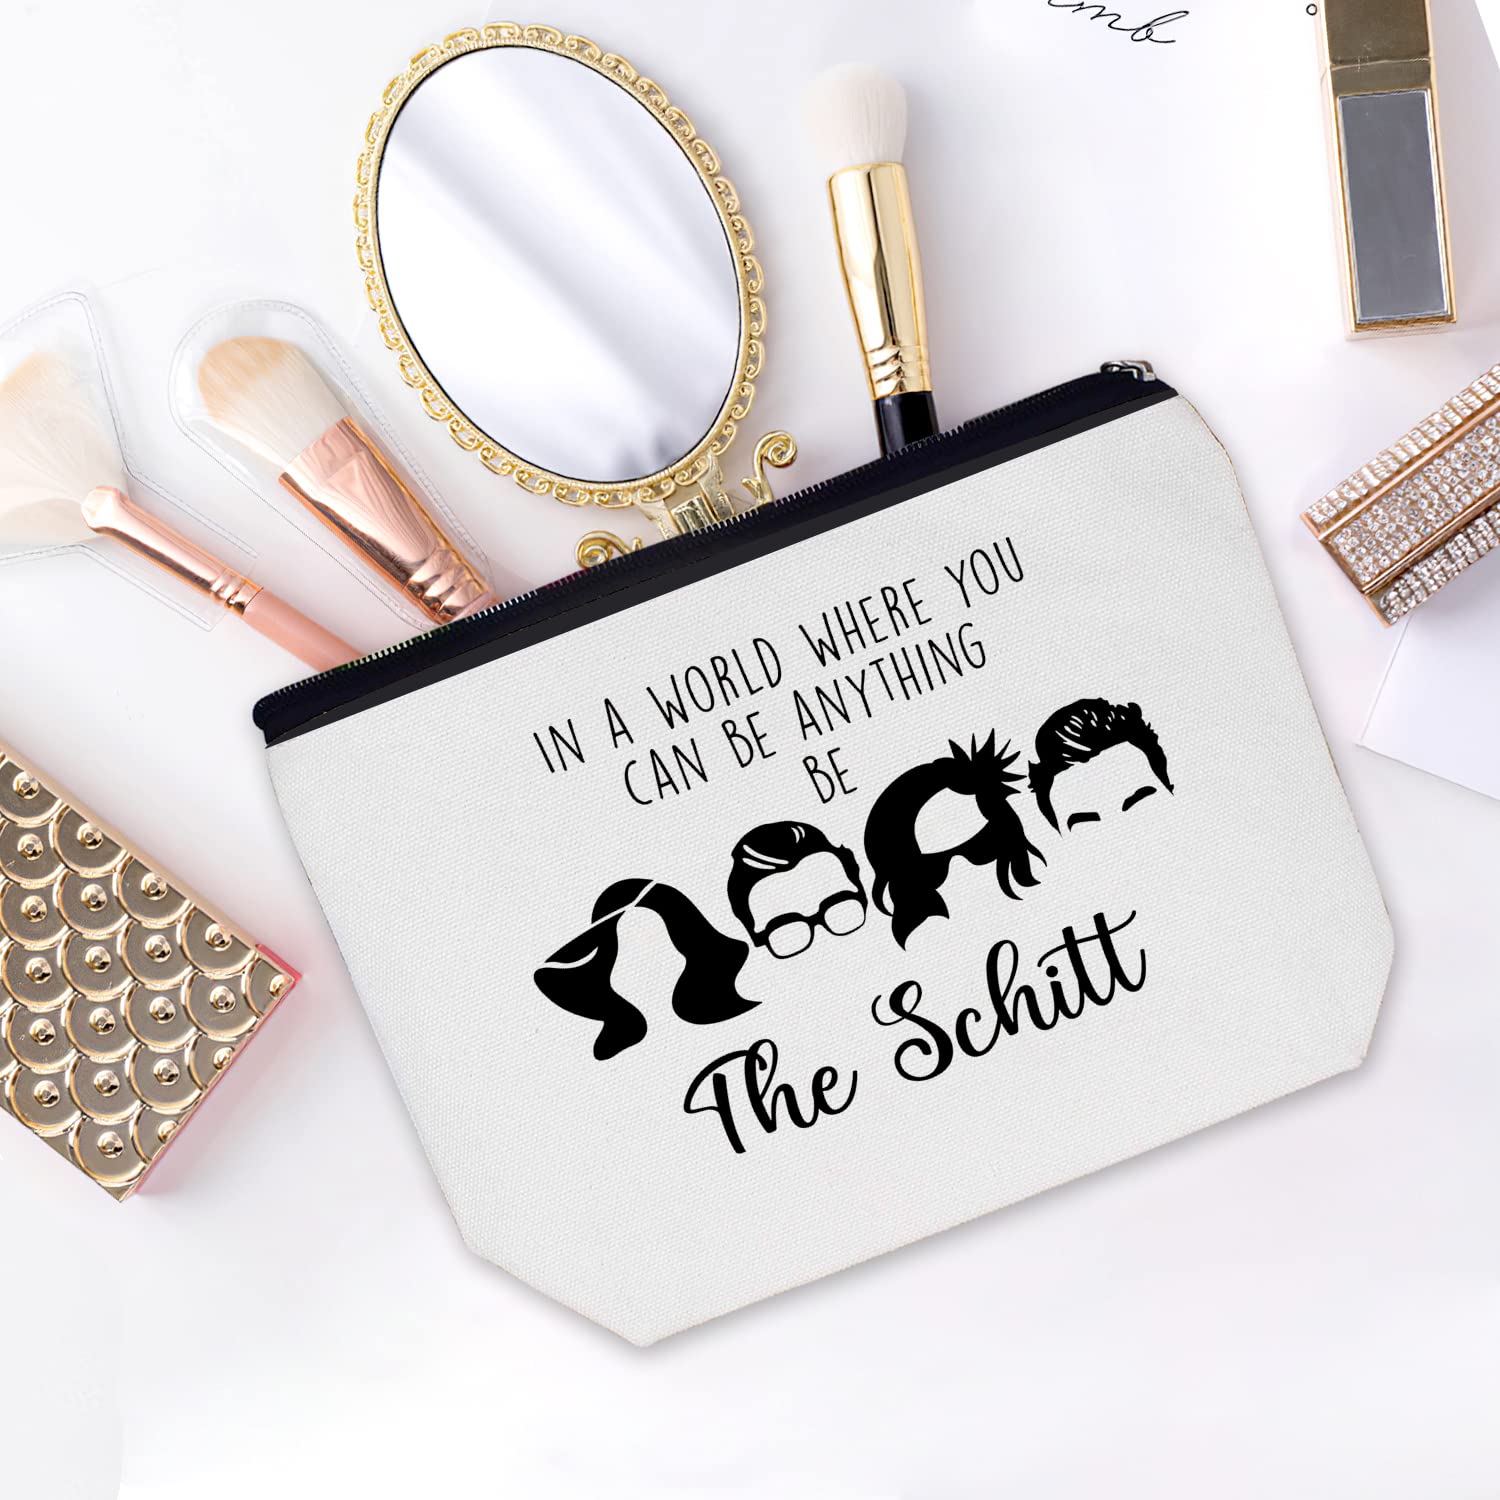 Wxptxf Funny Gear Merch Zipper Pouch Makeup Bag In A World Where You Can Be Anything Be Inspired Merchandis for Women Friends Gifts Travel Cosmetic Bag 1